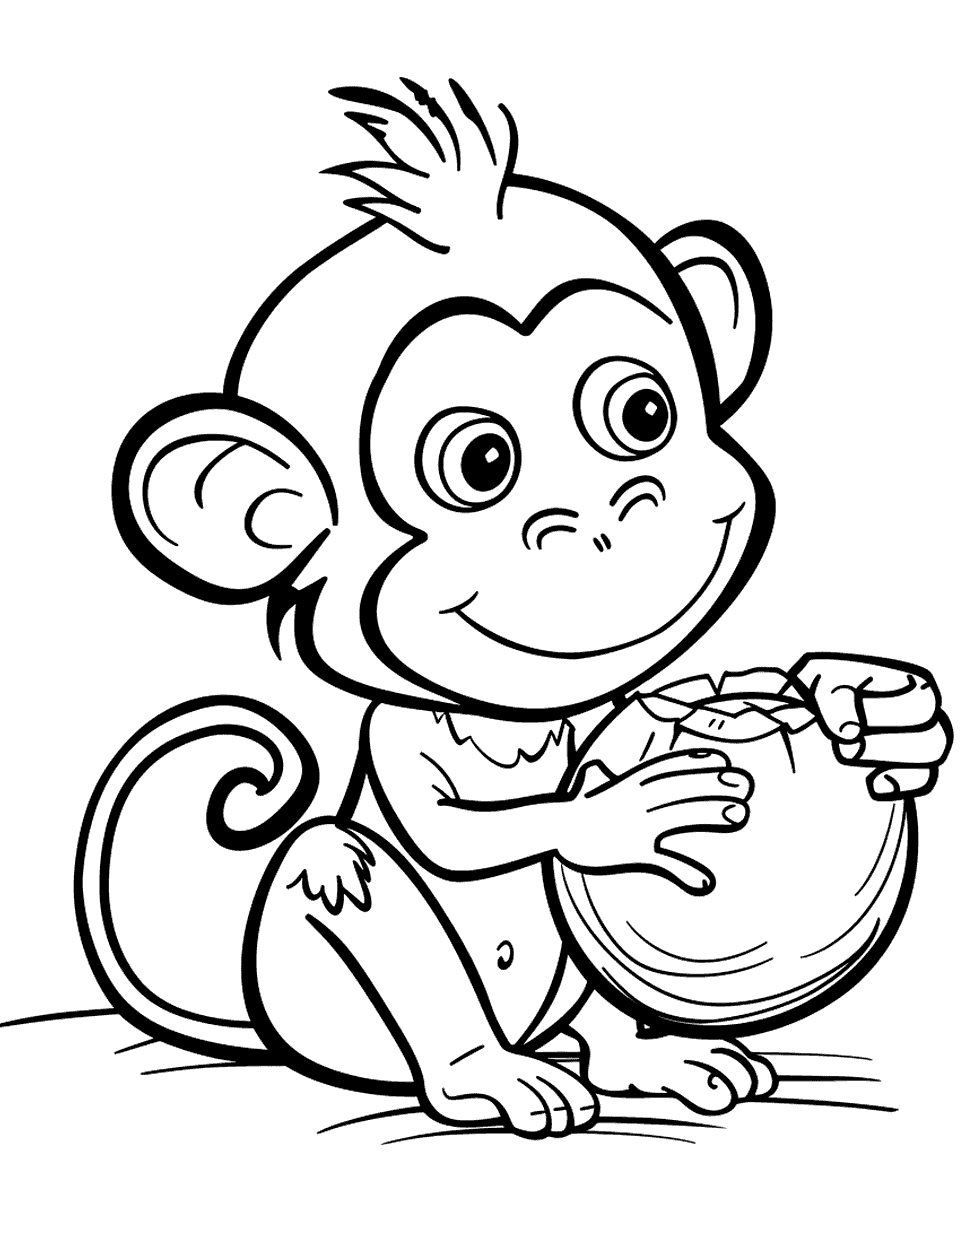 Monkey Playing with Coconut Coloring Page - A monkey with an opened coconut ready to eat.